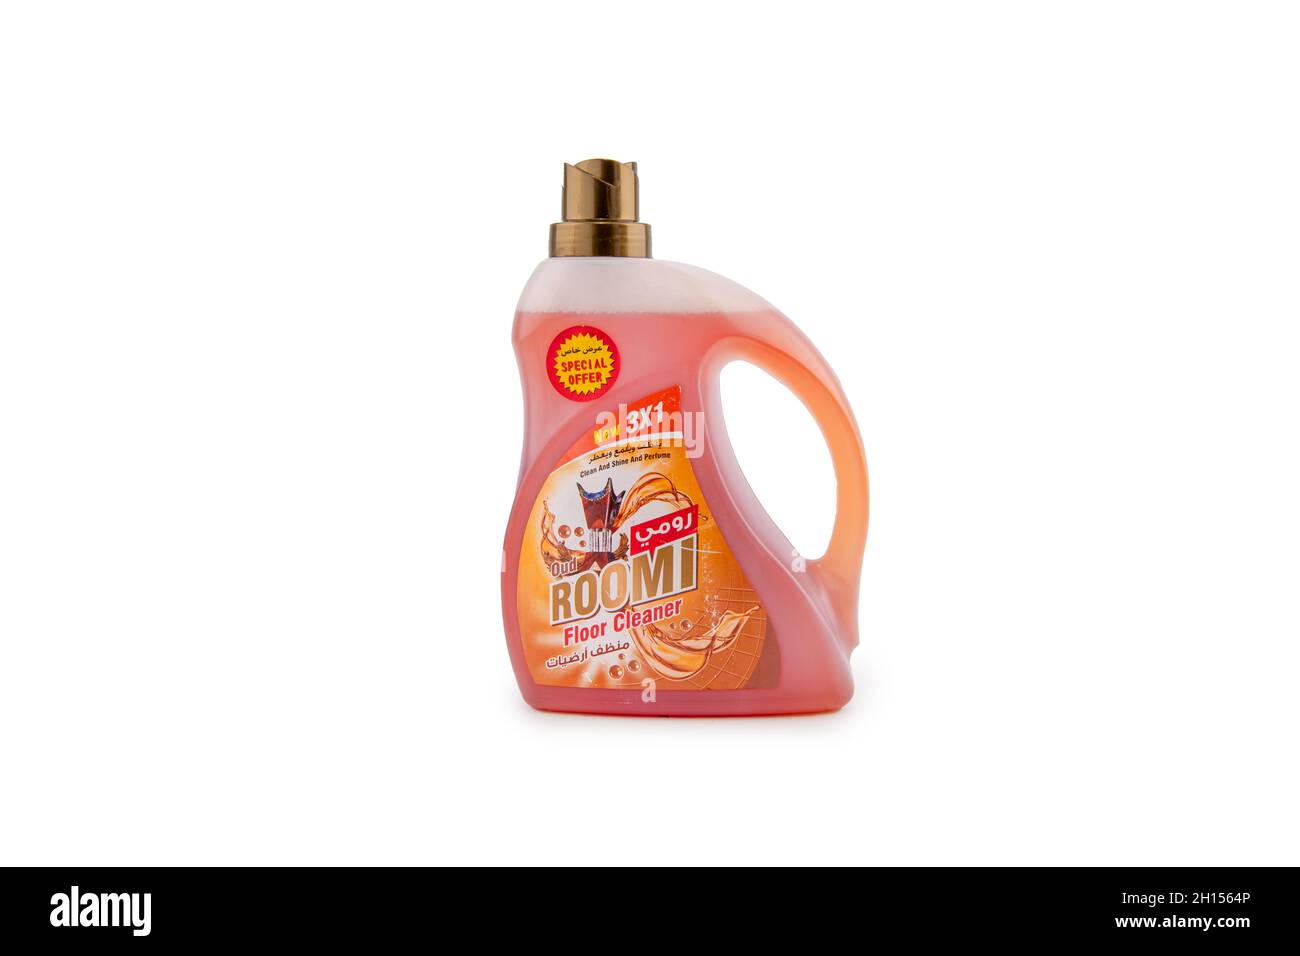 ROOMI FLOOR CLEANER OUD ON ISOLATED BACKGROUND Stock Photo - Alamy